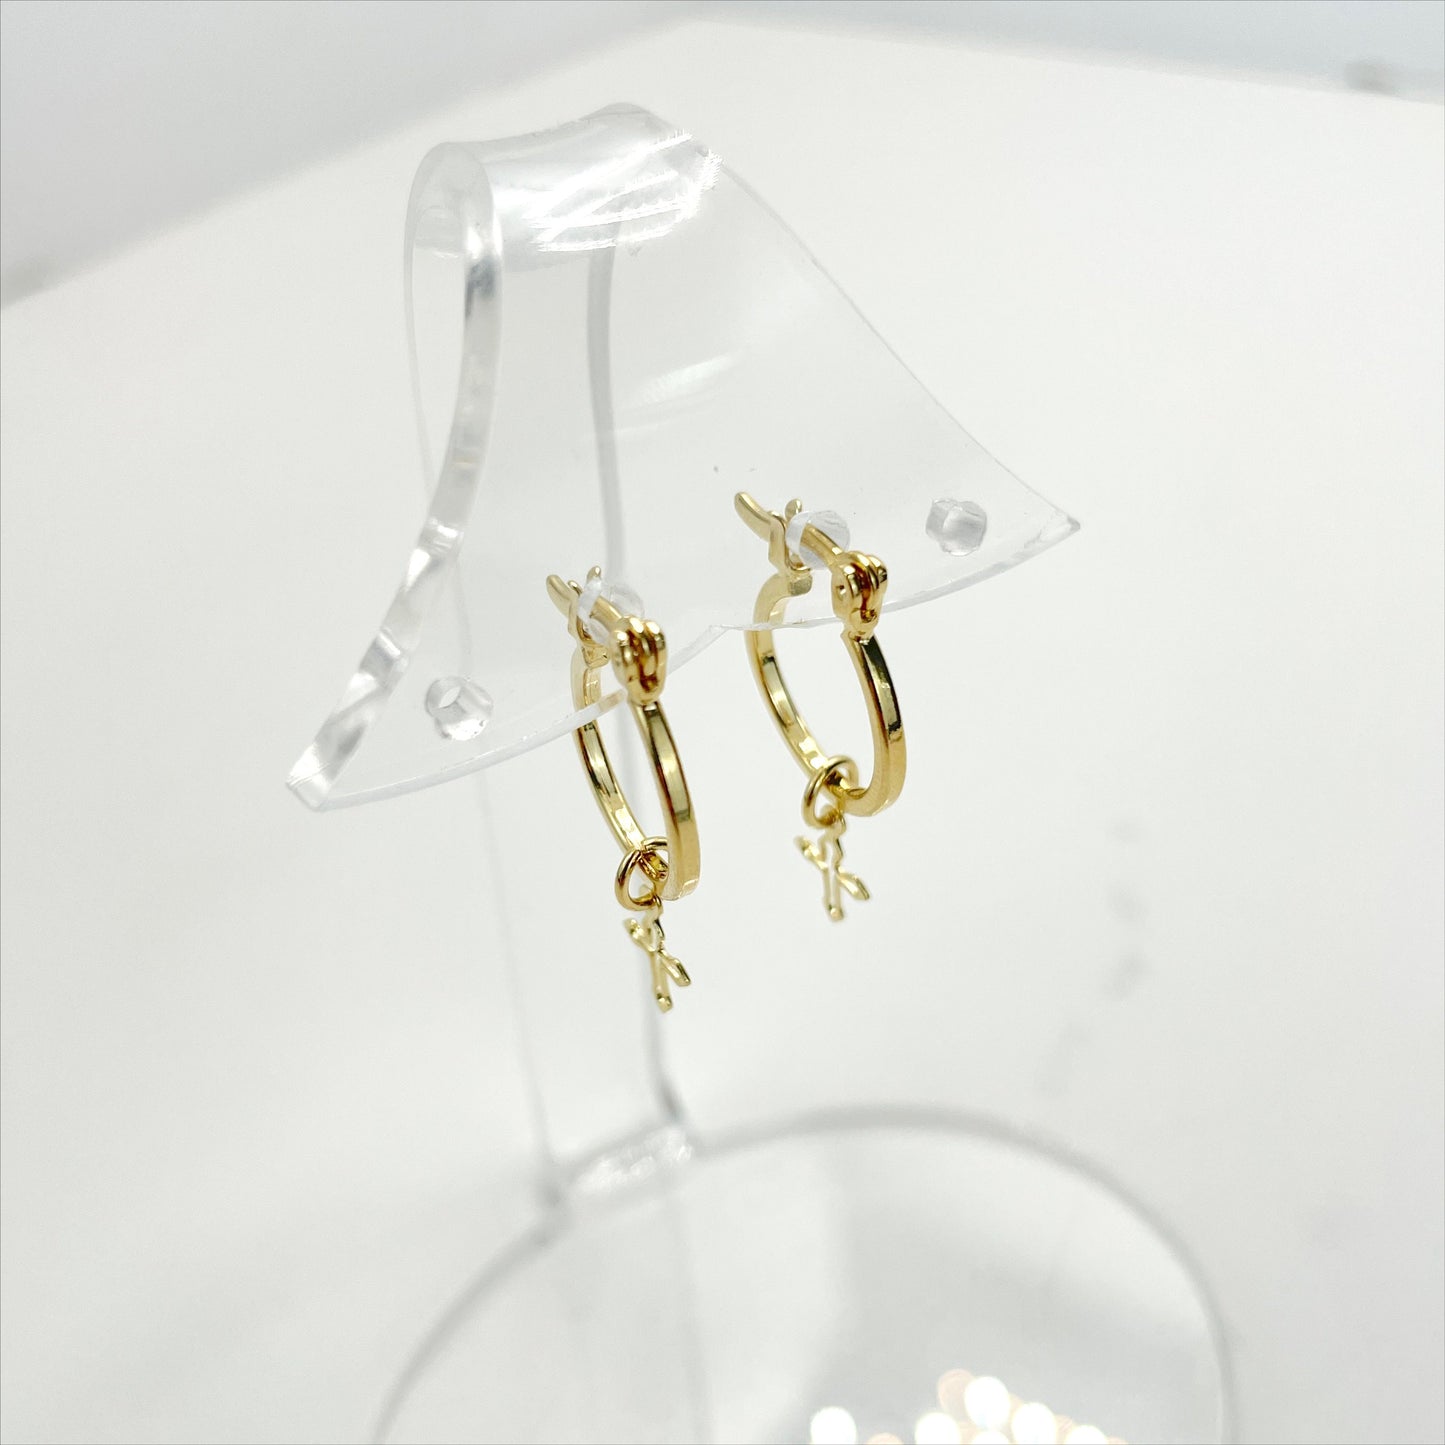 18k Gold Filled 14mm Hoop Earrings with Cutout Cross Charms Wholesale Jewelry Making Supplies